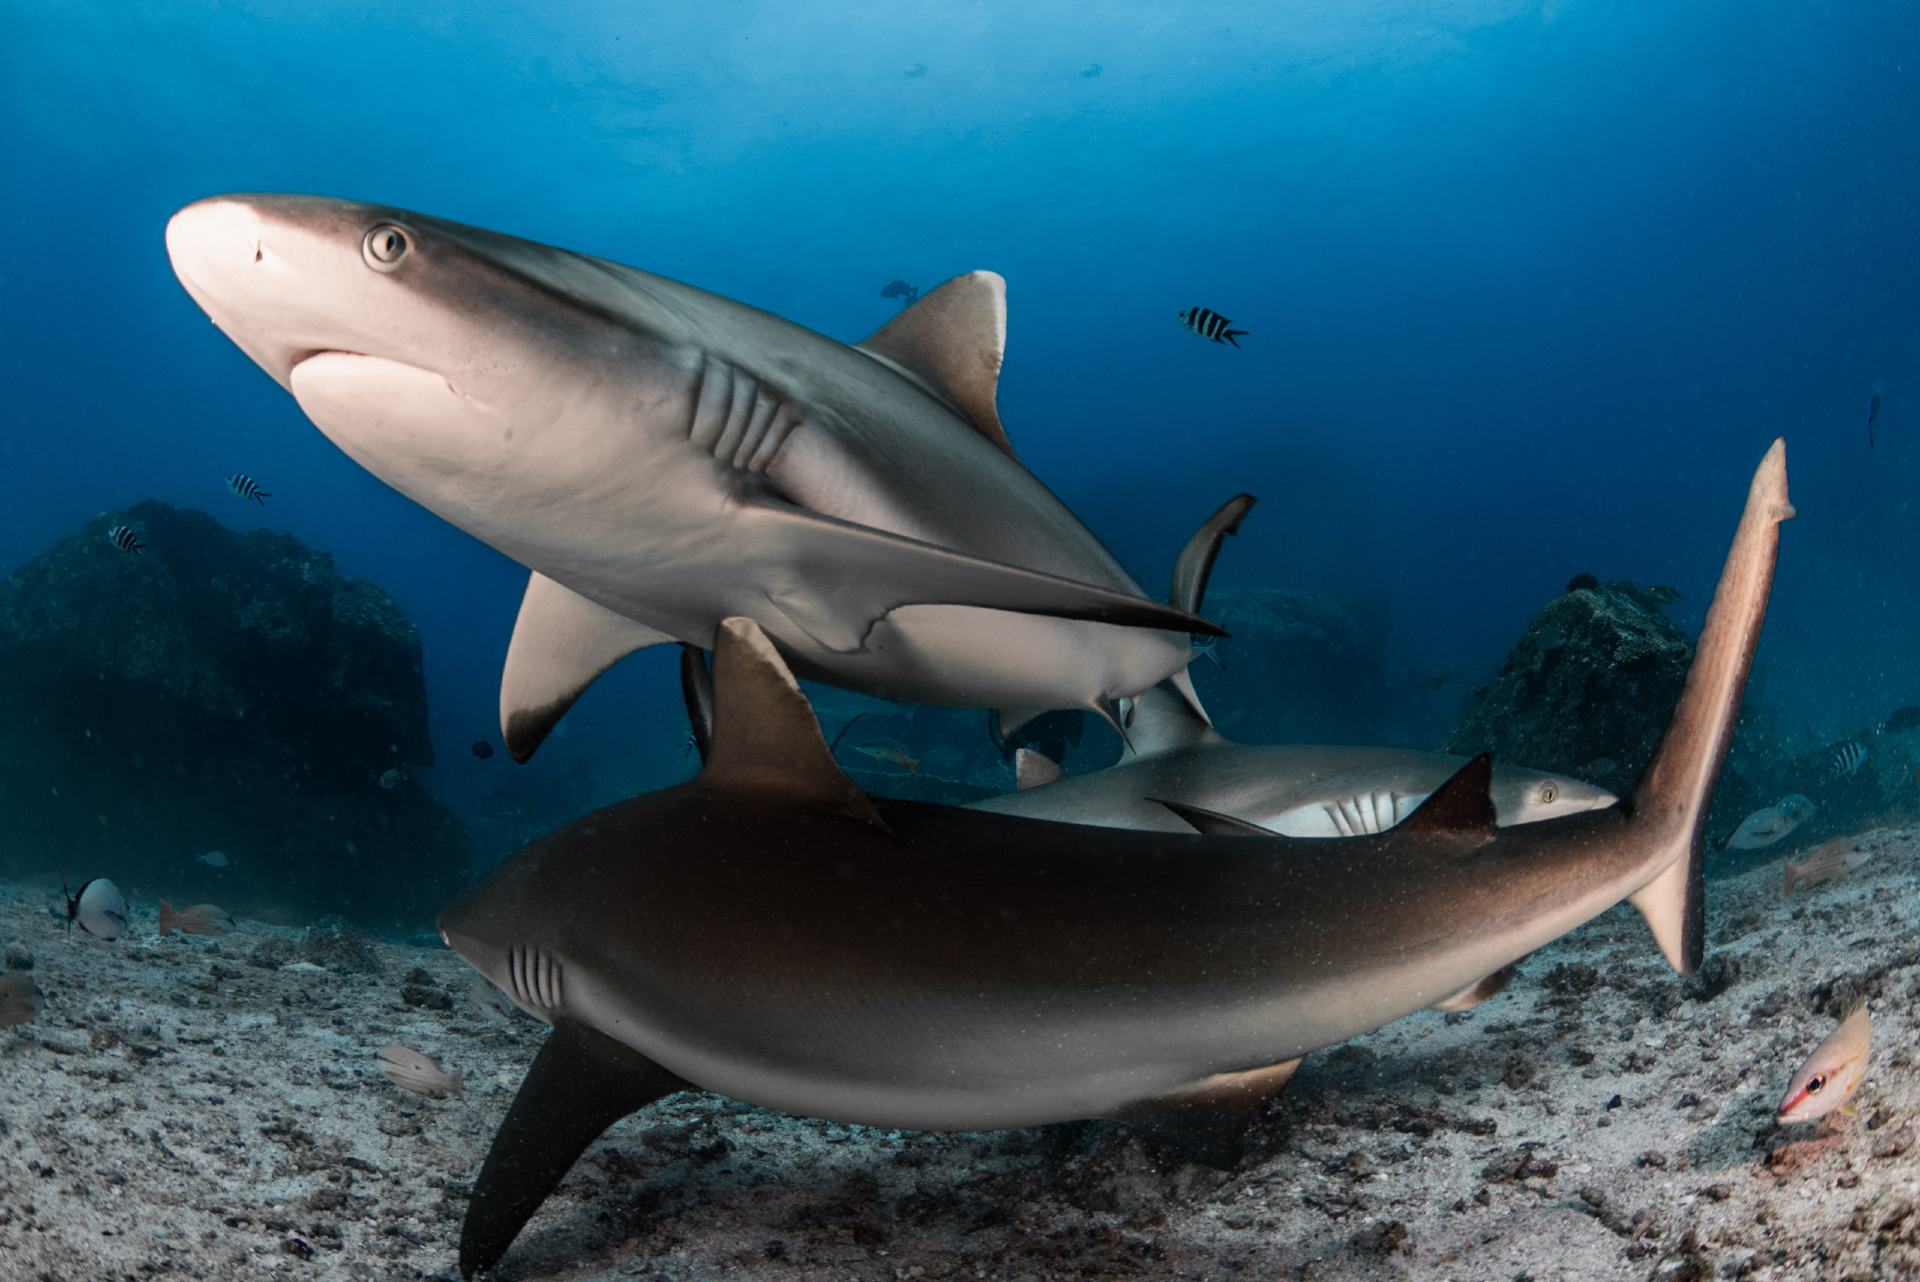 Divers catch grey reef sharks napping